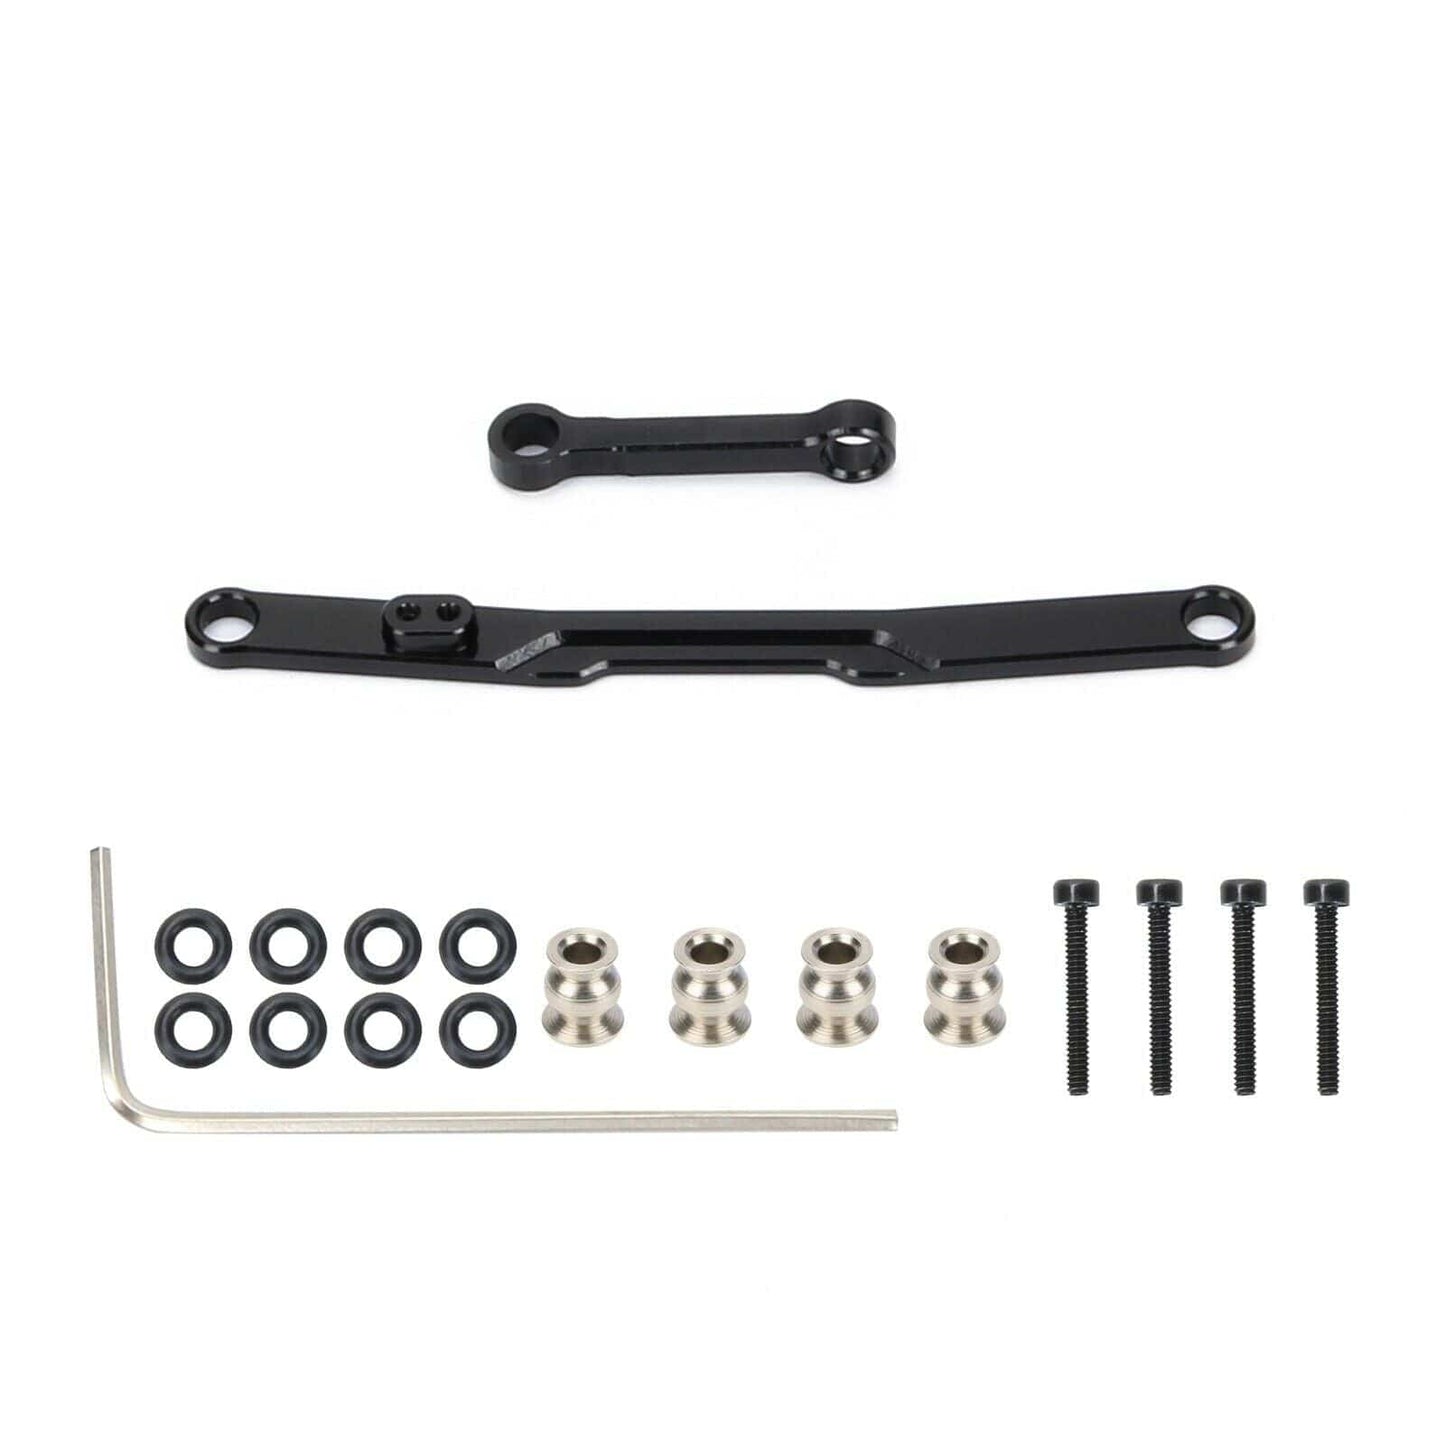 RCAWD Black Axial SCX24 Crawler Fix Link Steering Rod front steering saver complete HRASXTF49X01 upgrade parts